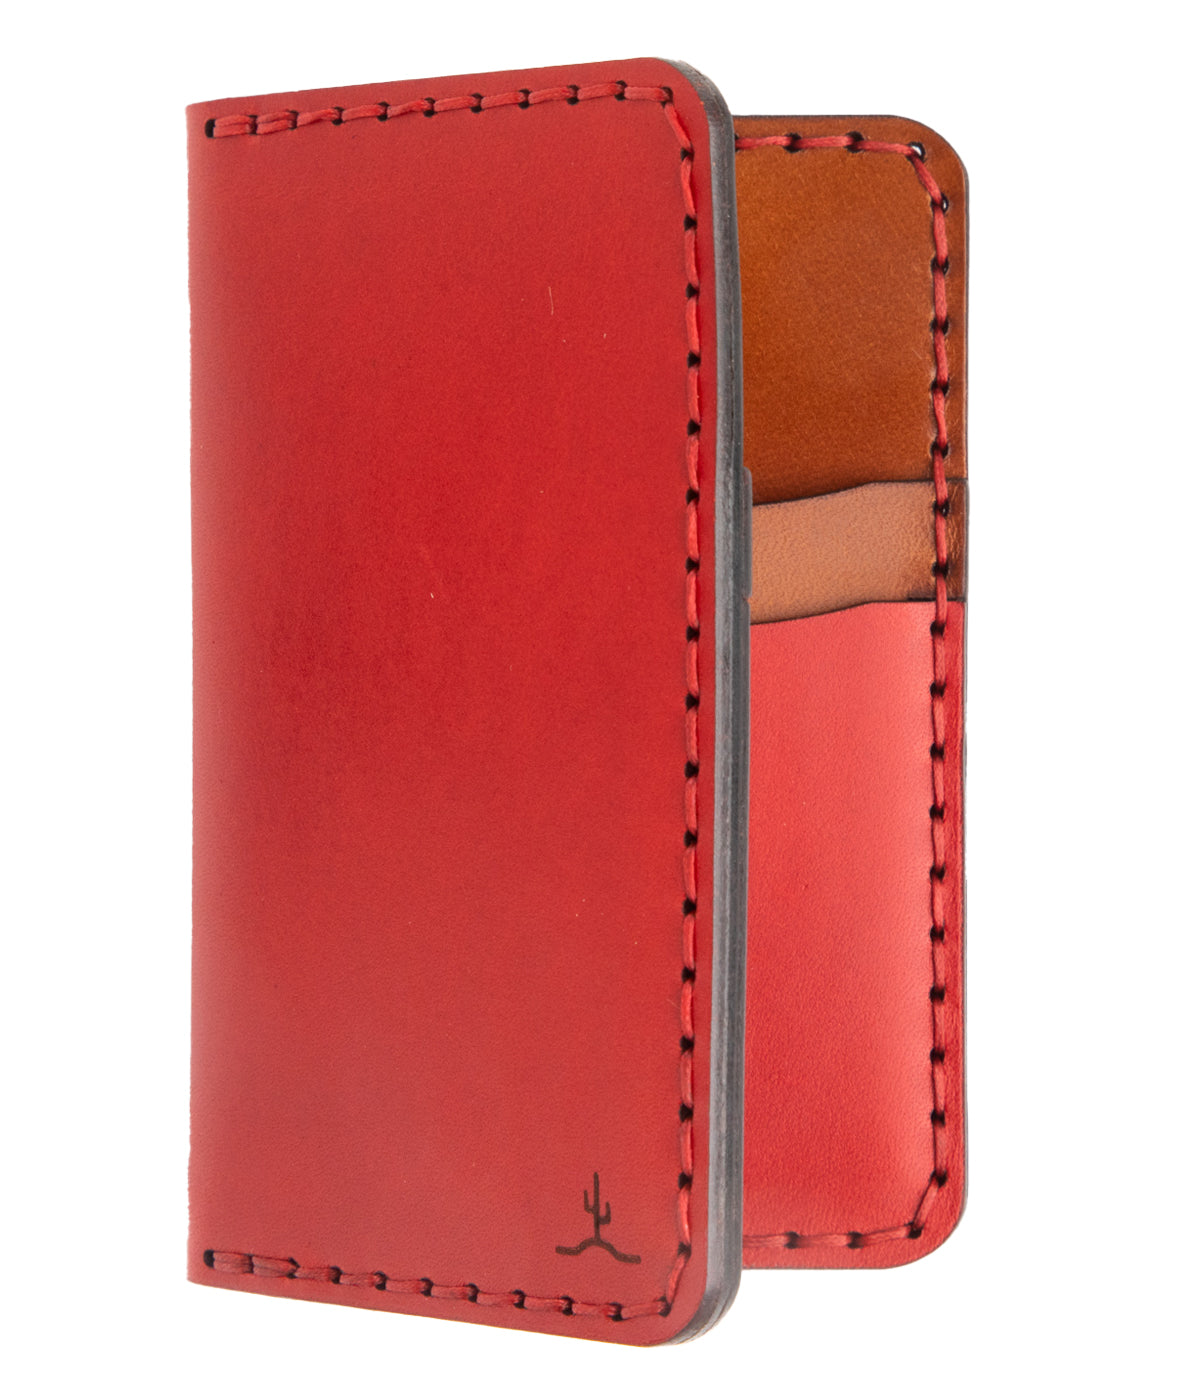 red exterior and brown interior leather wallet with four card pockets